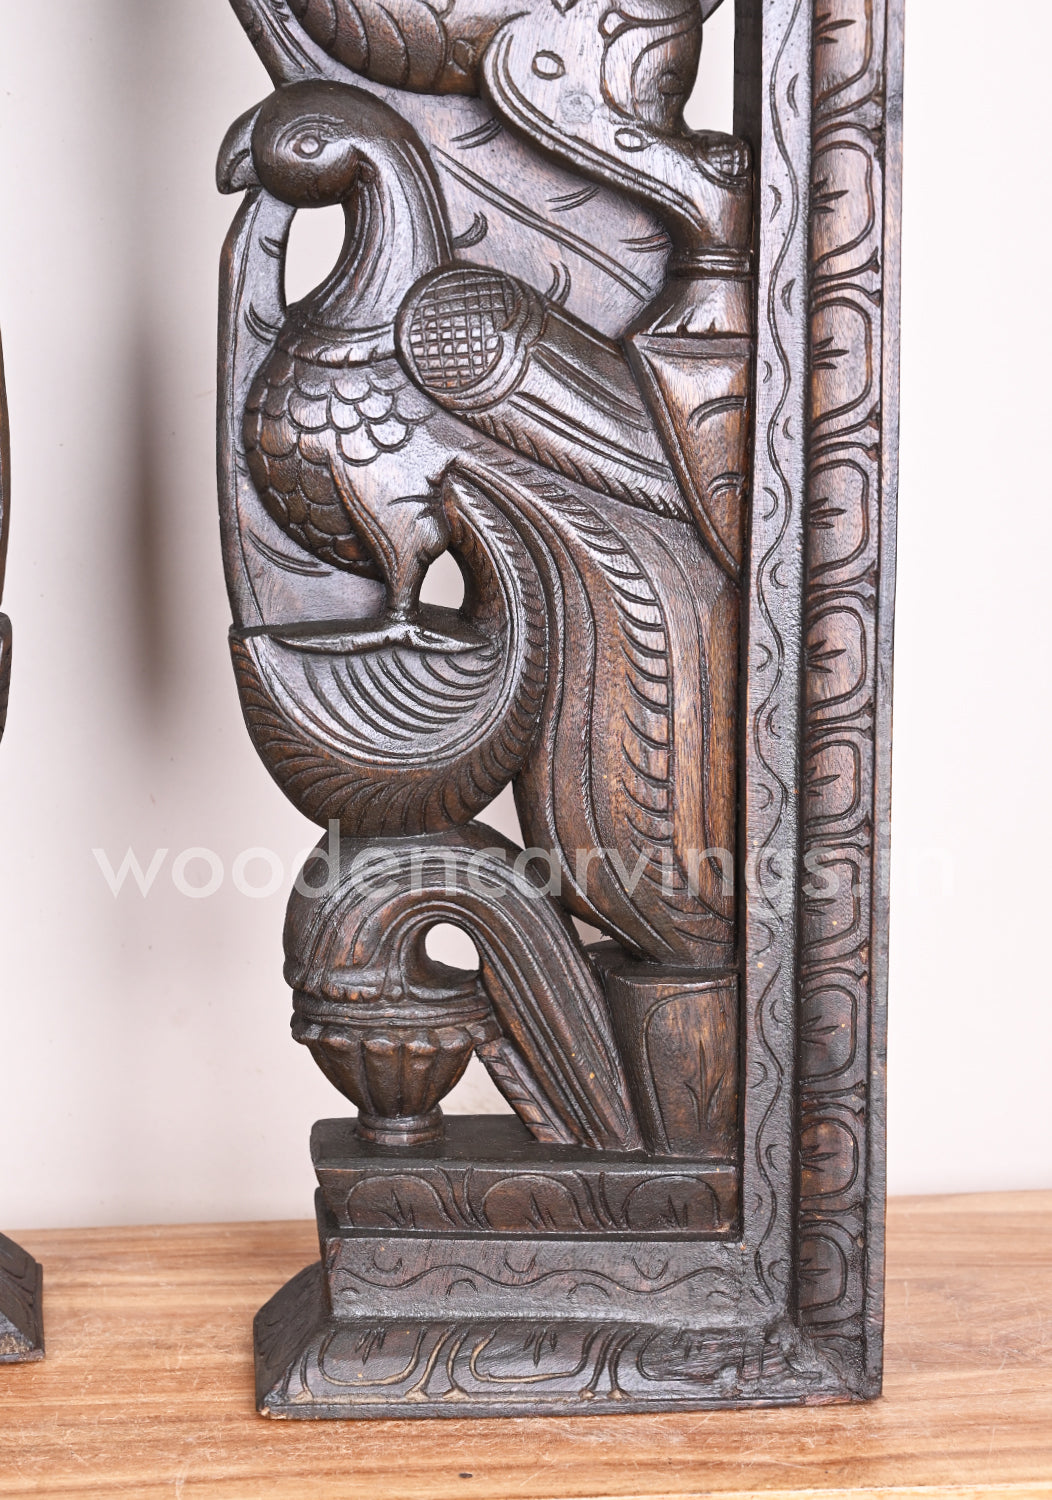 Handmade Beautiful Man Seated on Horse With Hamsa Bird and Wooden Yaazhi Paired Wall Mount 38"